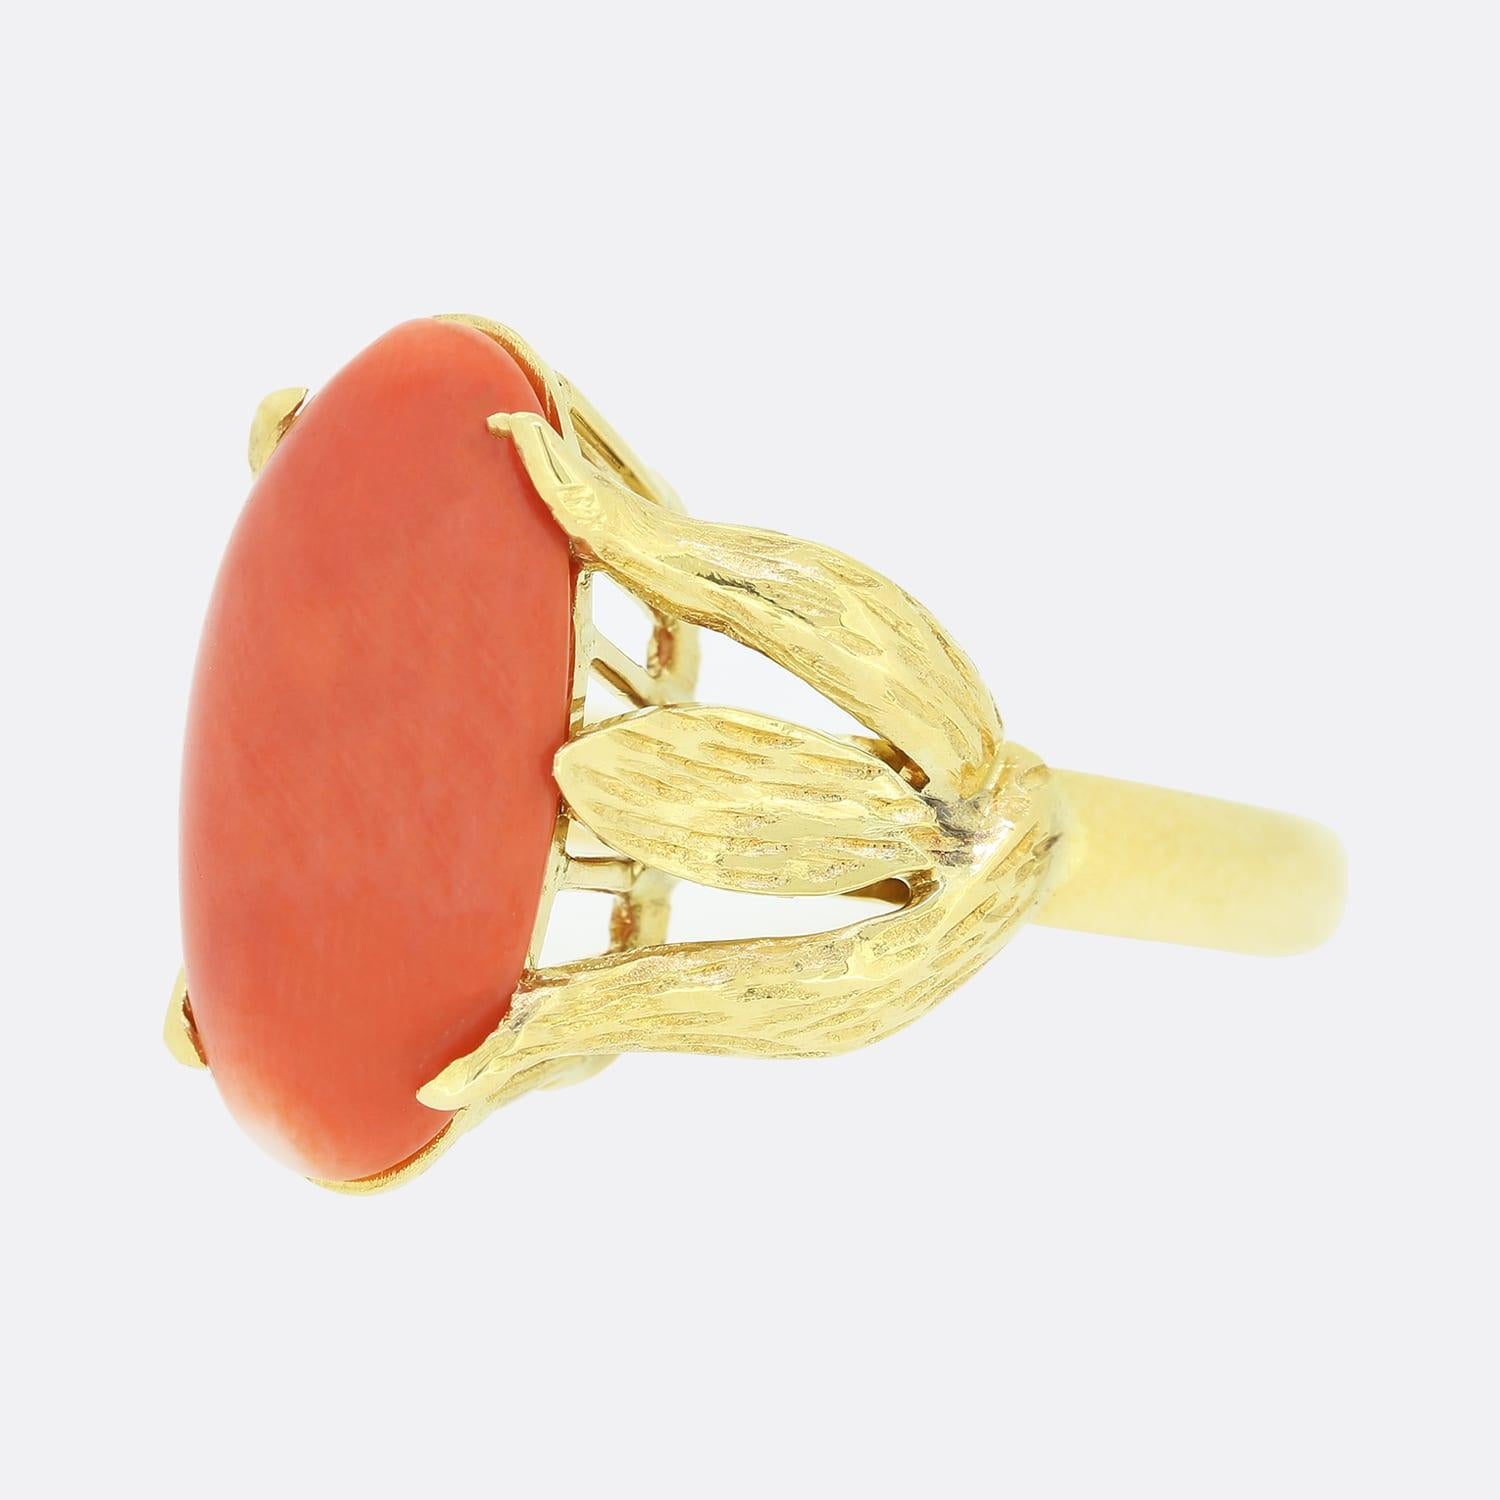 This is an 18ct yellow gold coral ring. The central coral stone is held with 6 prongs that take the form of leaves. the coral stone is a beautiful orange colour and has a small white patch at one end.

Condition: Used (Very Good)
Weight: 5.8